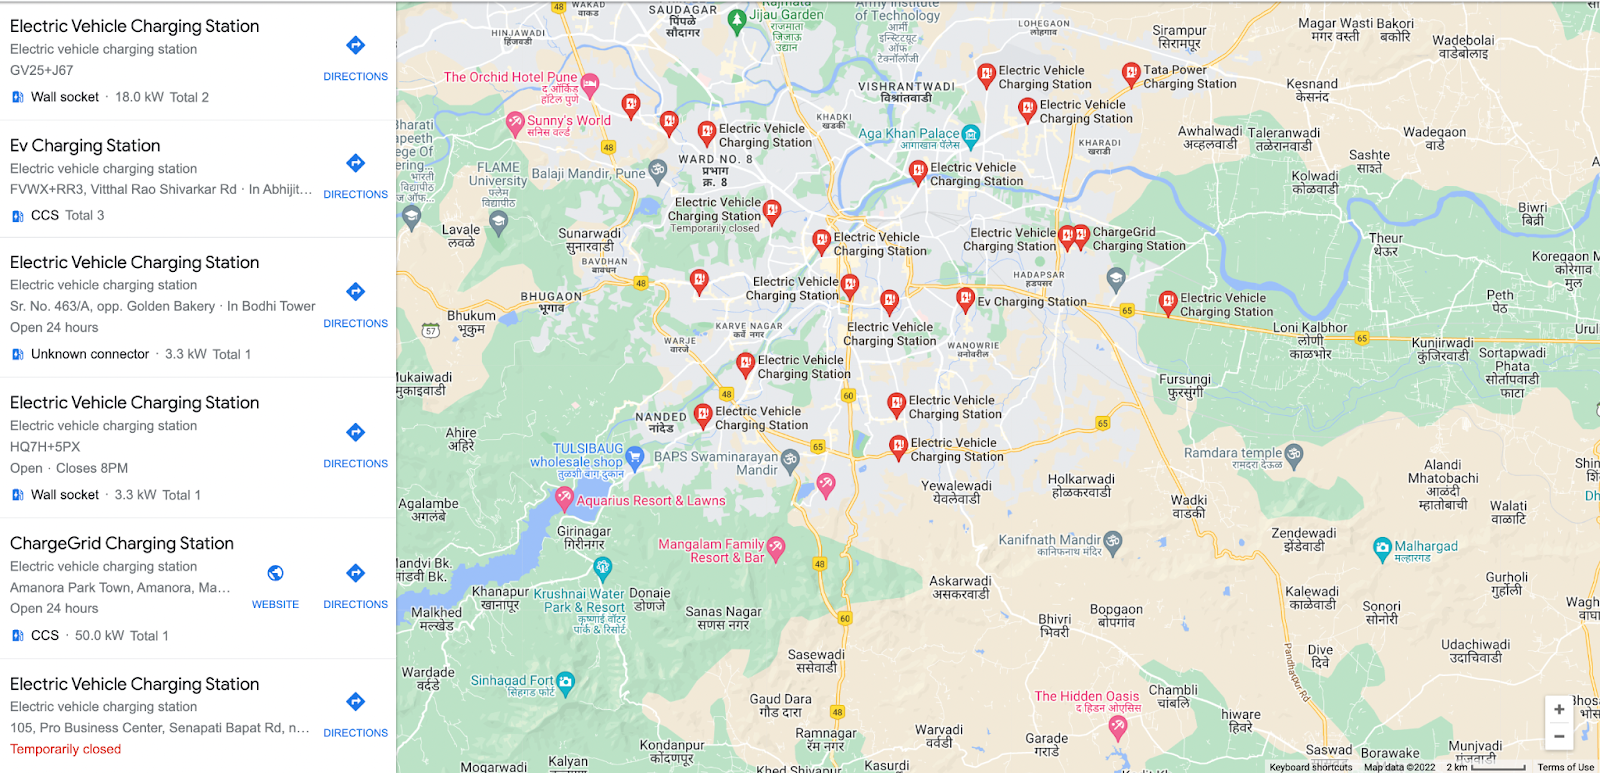 electric vehicle charging stations in Pune - googlemap- yocharge